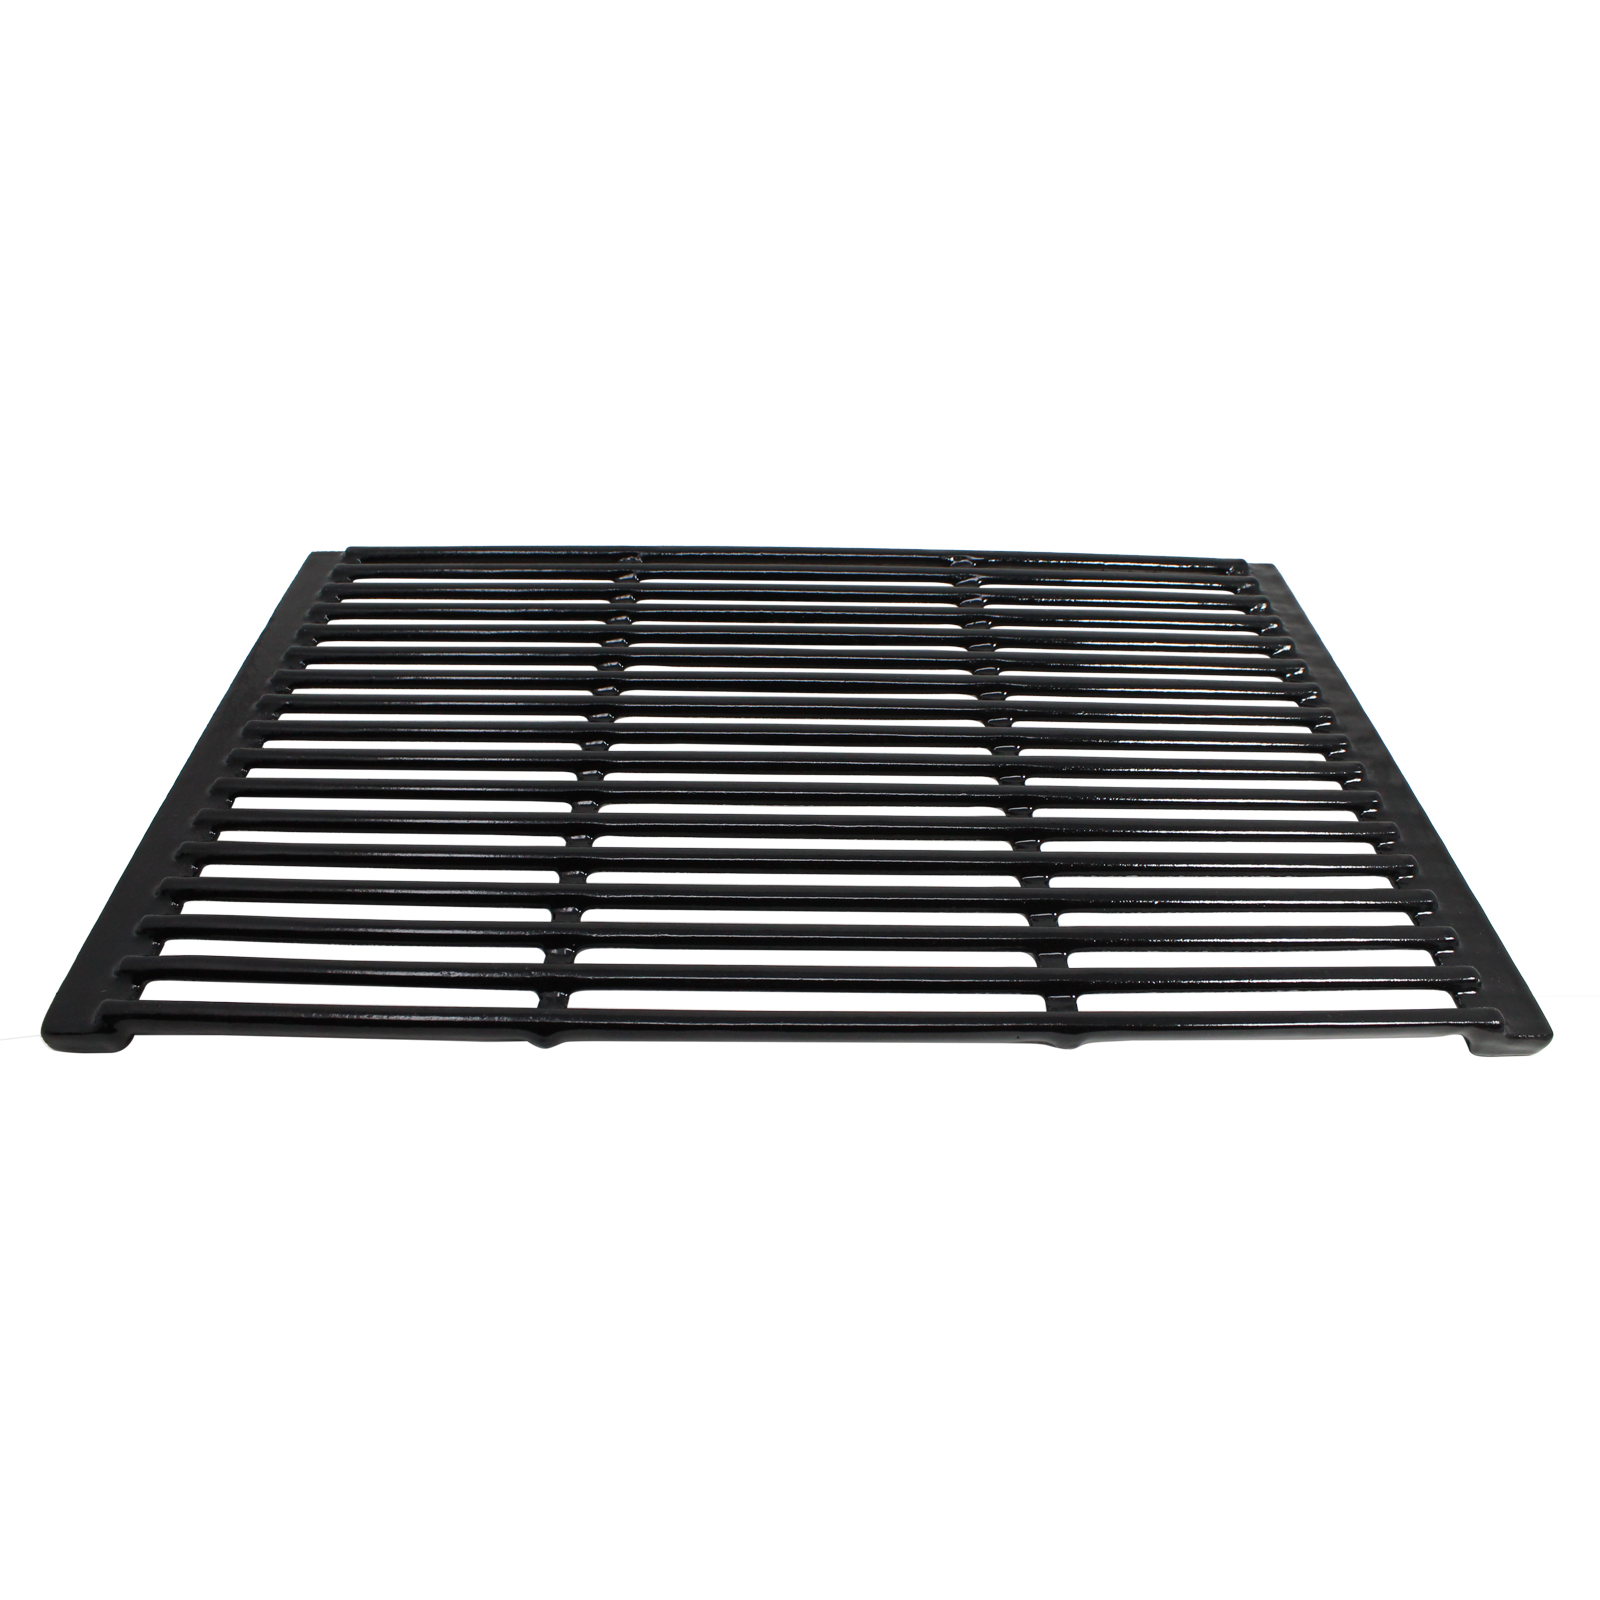 BBQ Grill Cooking Grates Replacement Parts for Grill Zone 6305 (810-6305-T) - Compatible Barbeque Porcelain Enameled Cast Iron Grid 19" - image 3 of 4